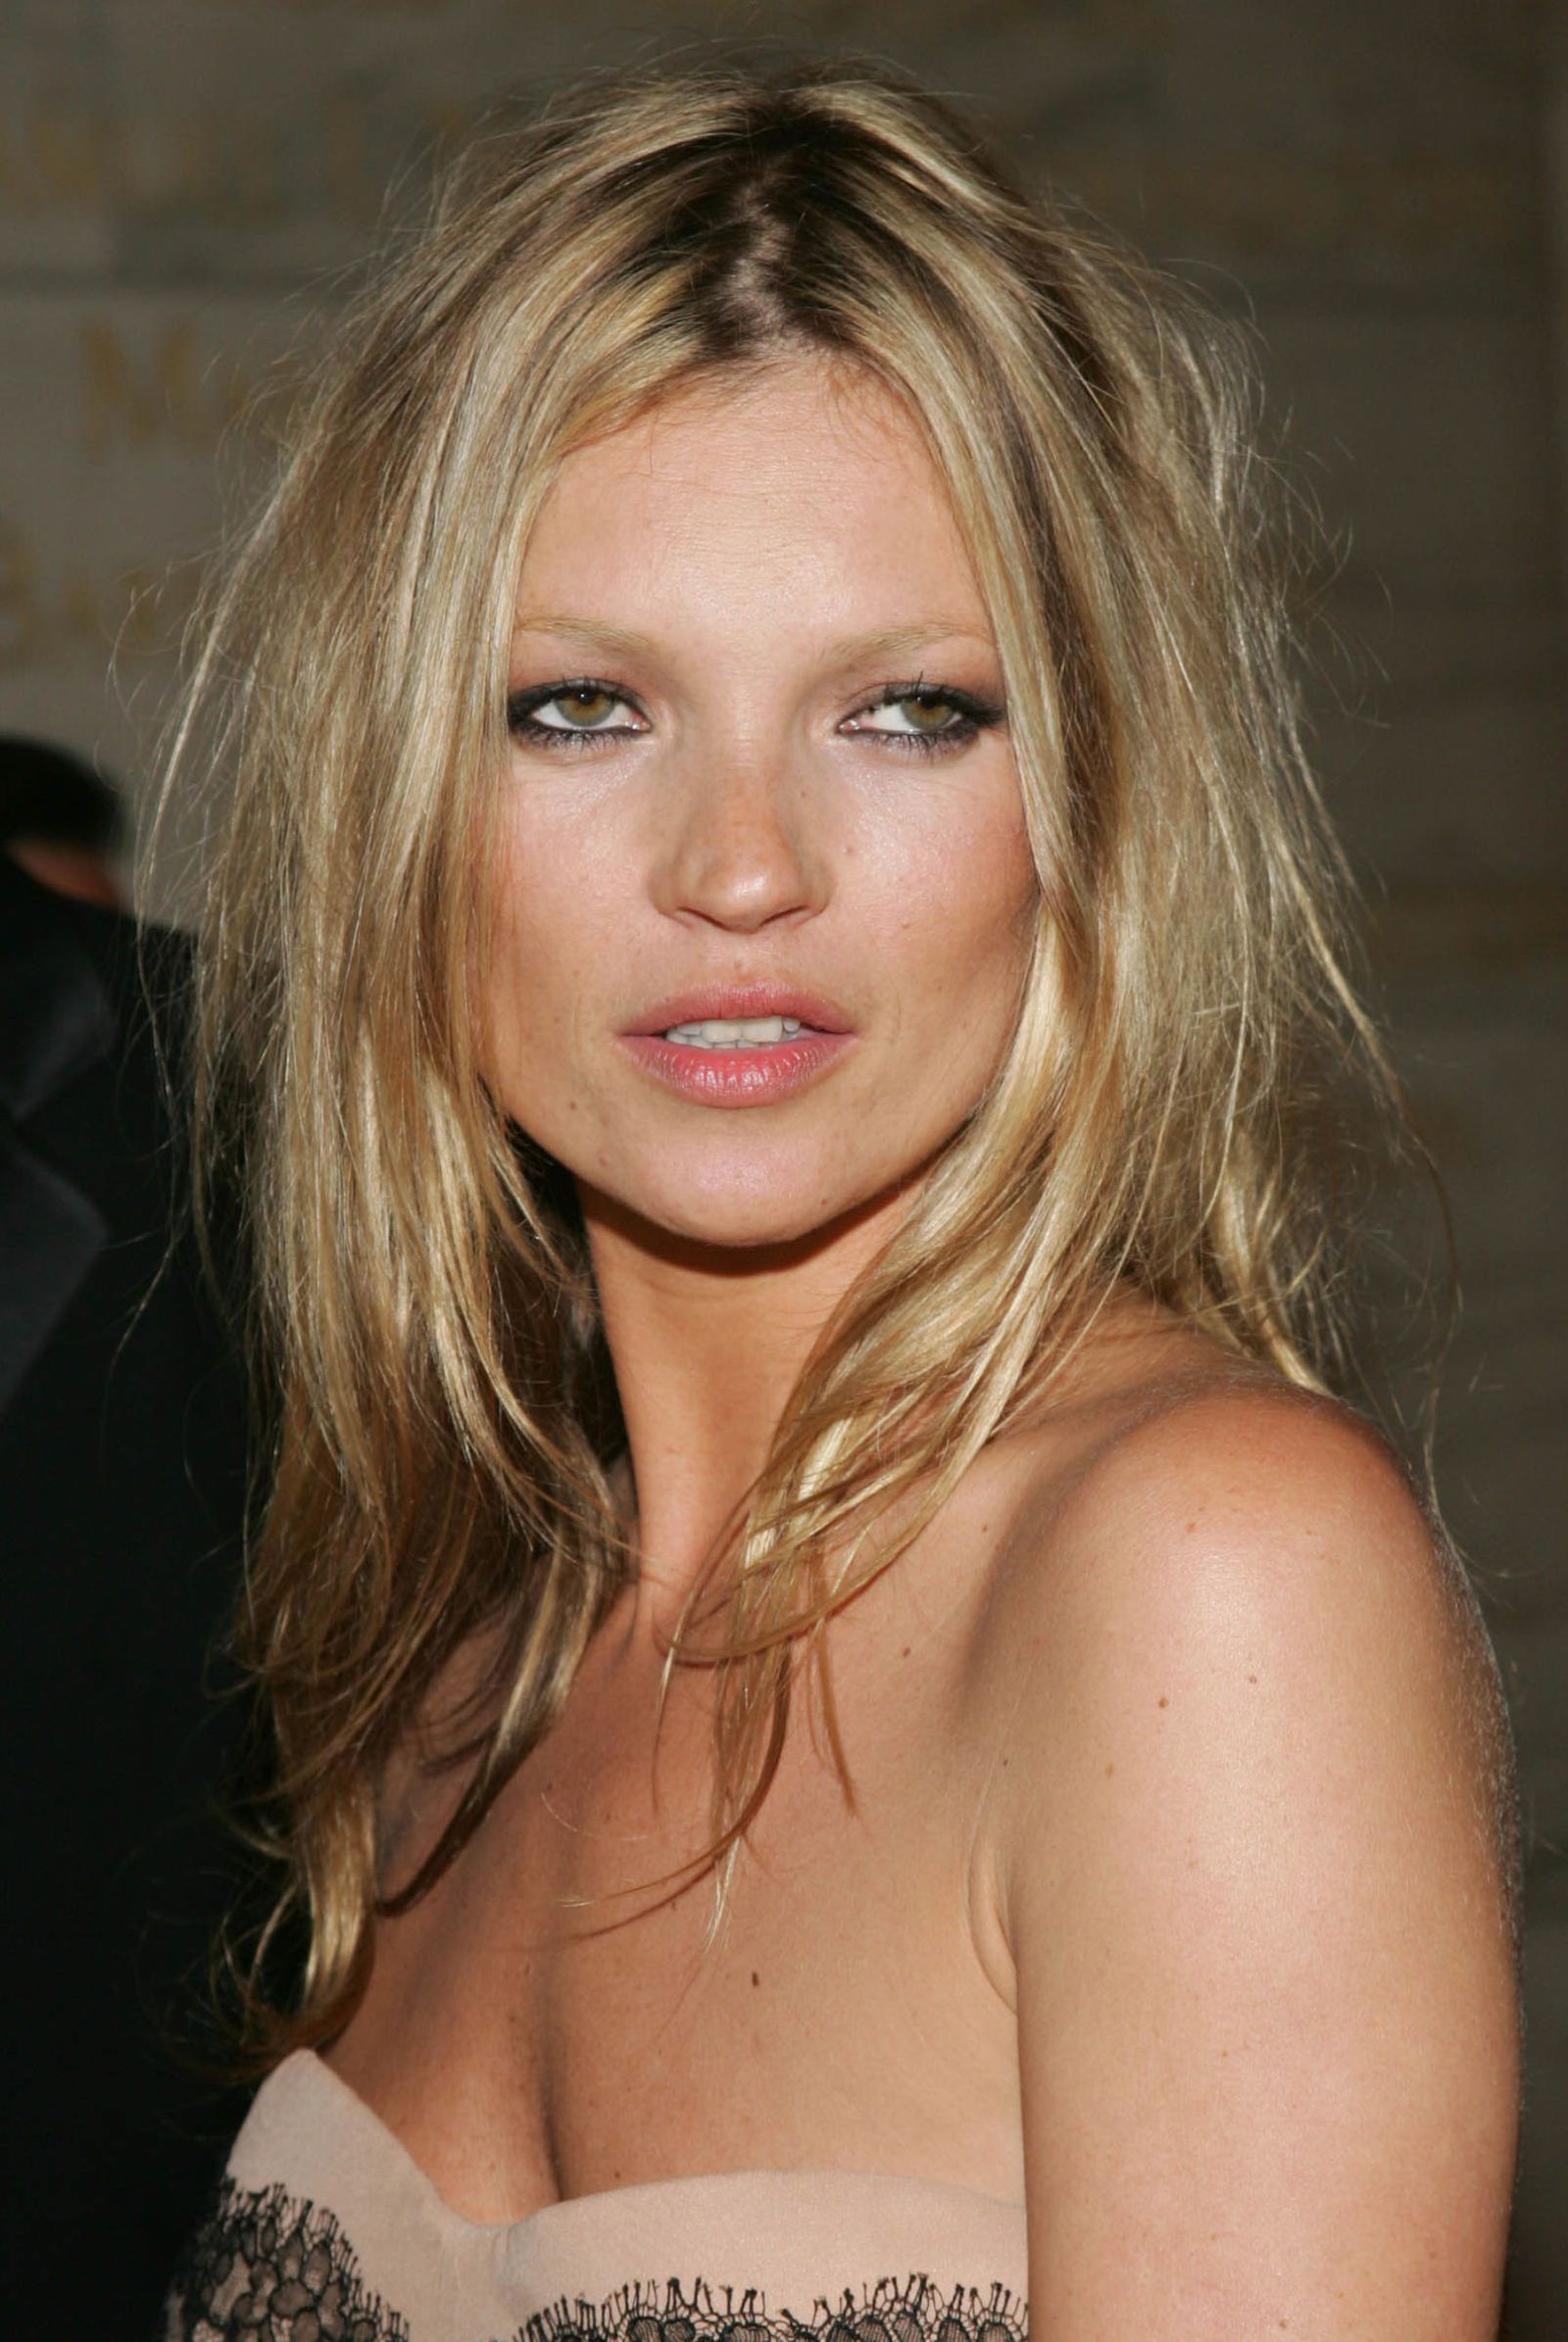 The De-Puffing Tool Kate Moss Always Keeps in Her Bag - NewBeauty